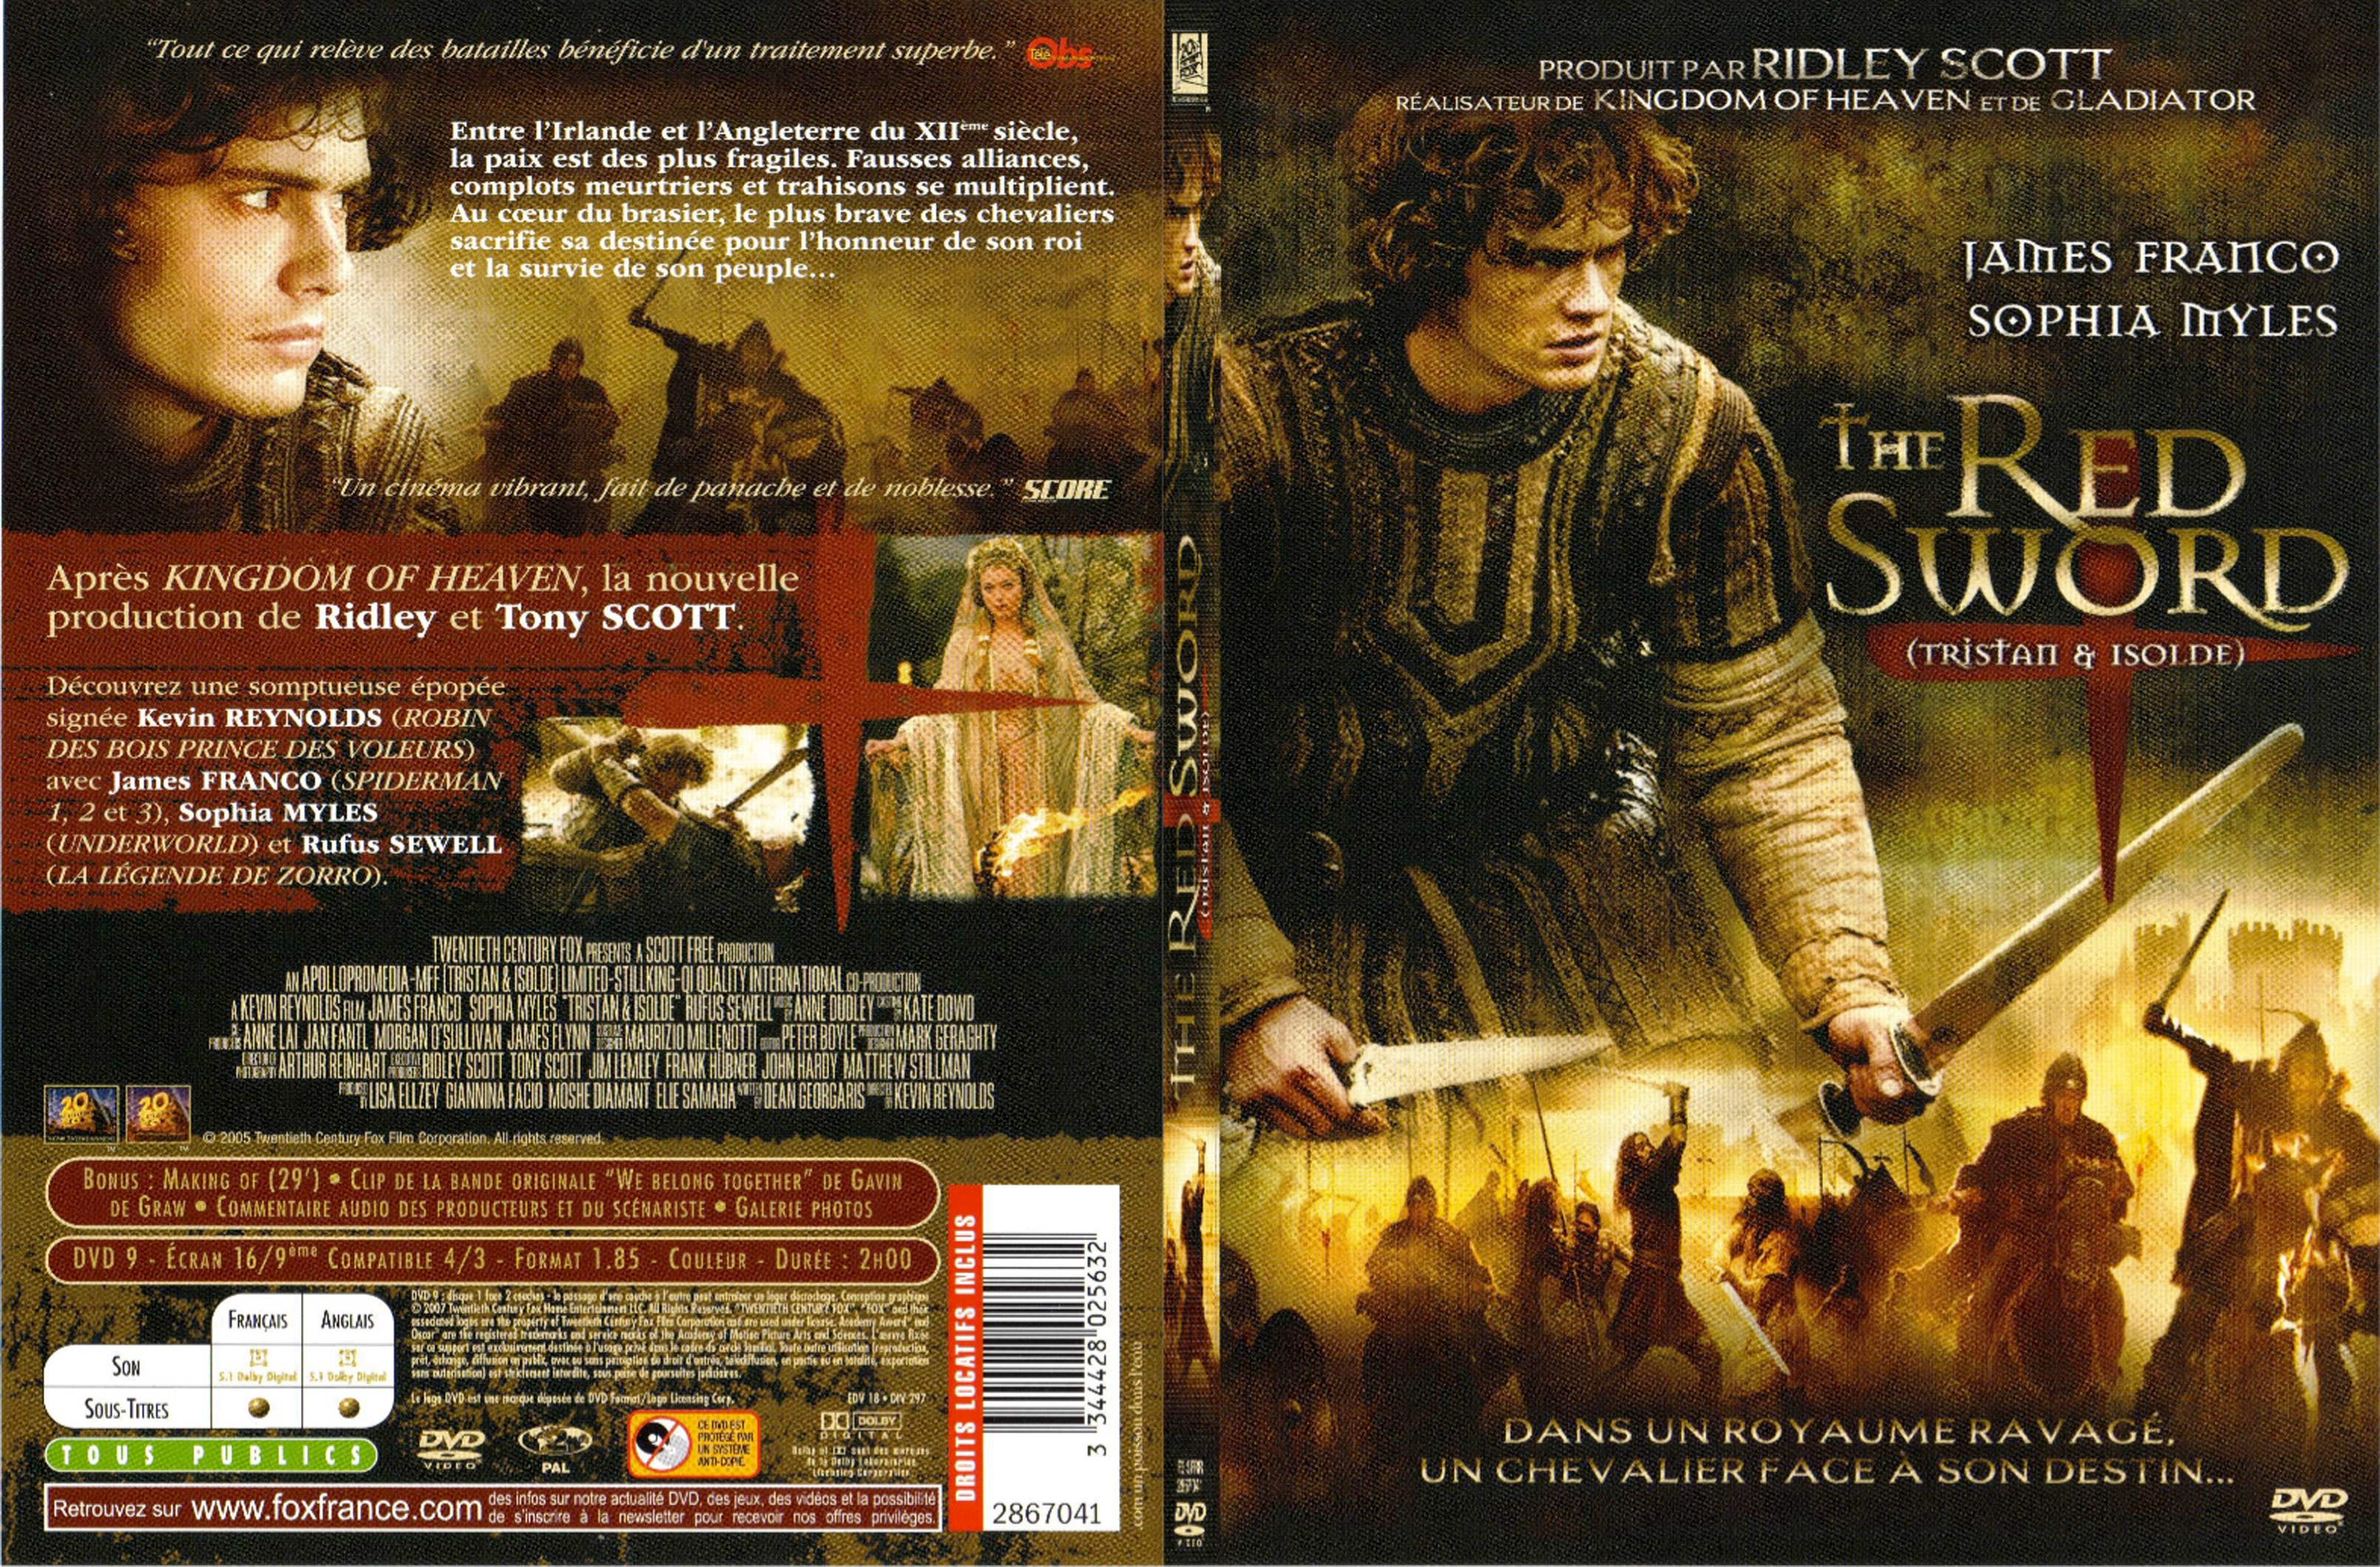 Jaquette DVD The red sword - SLIM